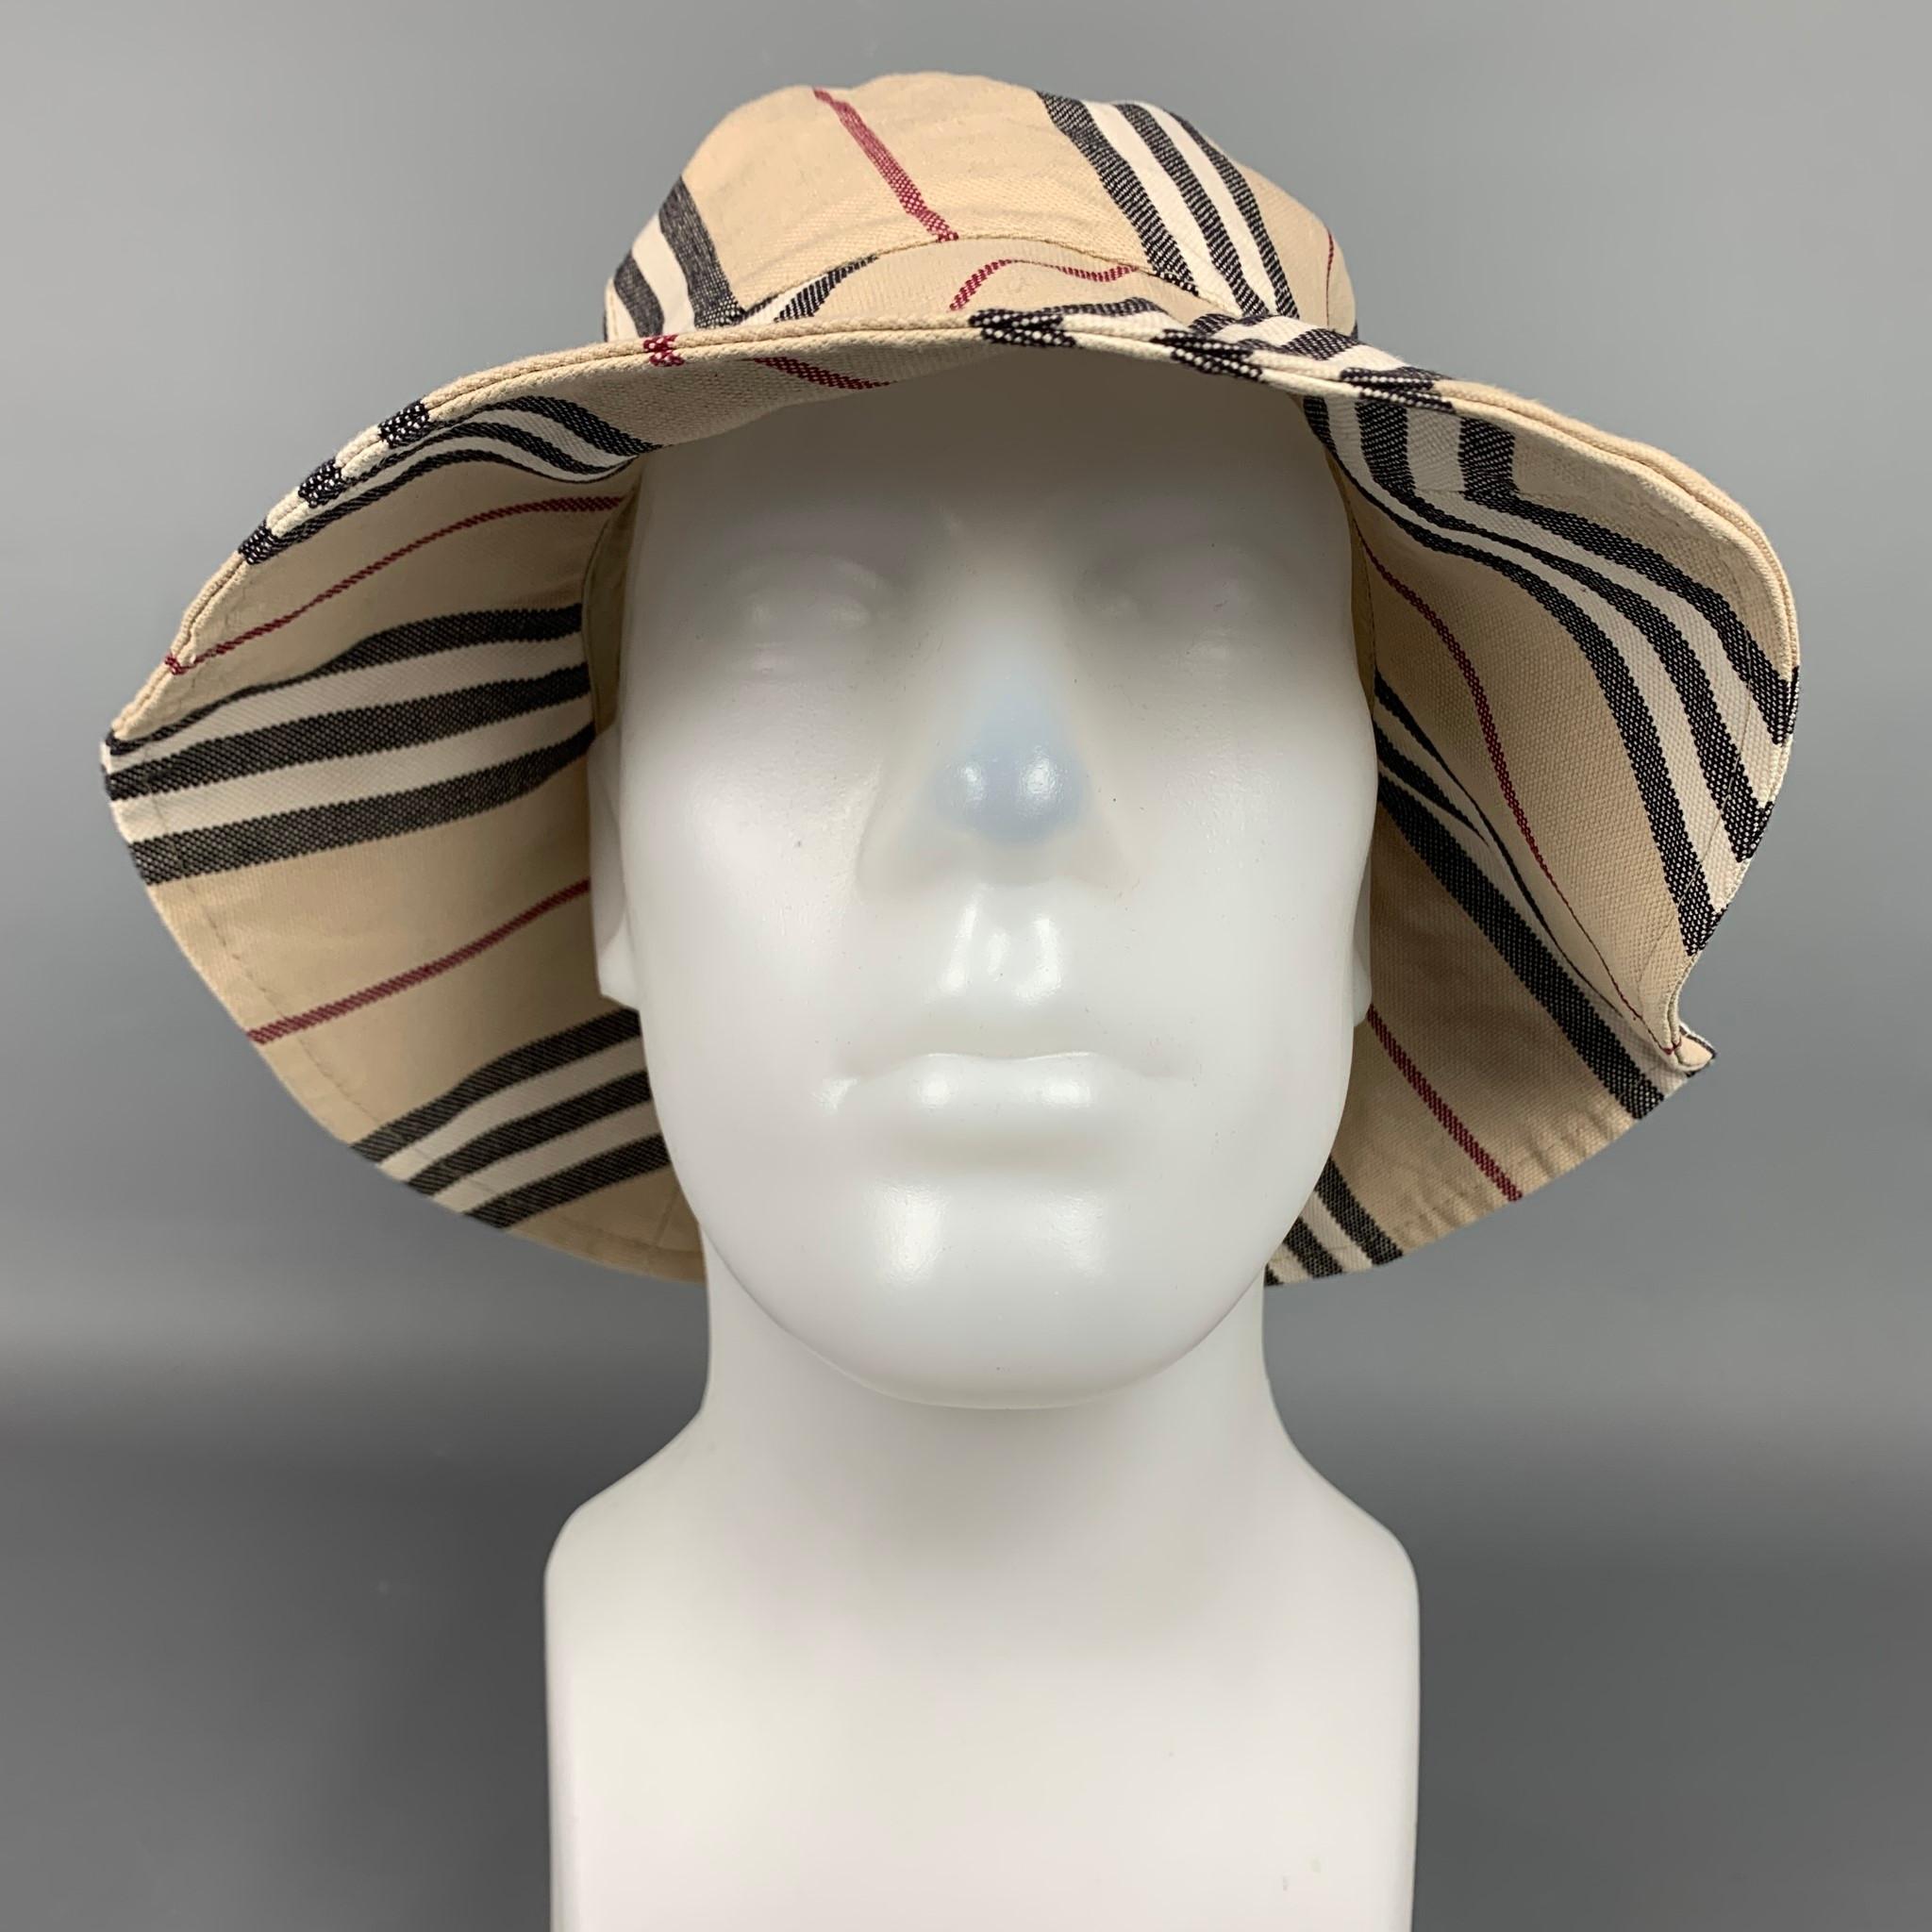 BURBERRY LONDON hat comes in a beige plaid cotton canvas featuring a bucket style and a wide brim.

Good Pre-Owned Condition.
Marked: Size tag removed.
Original Retail Price: $390.00

Measurements:

Opening: 17 in.
Brim: 3.5 in.
Height: 4 in. 